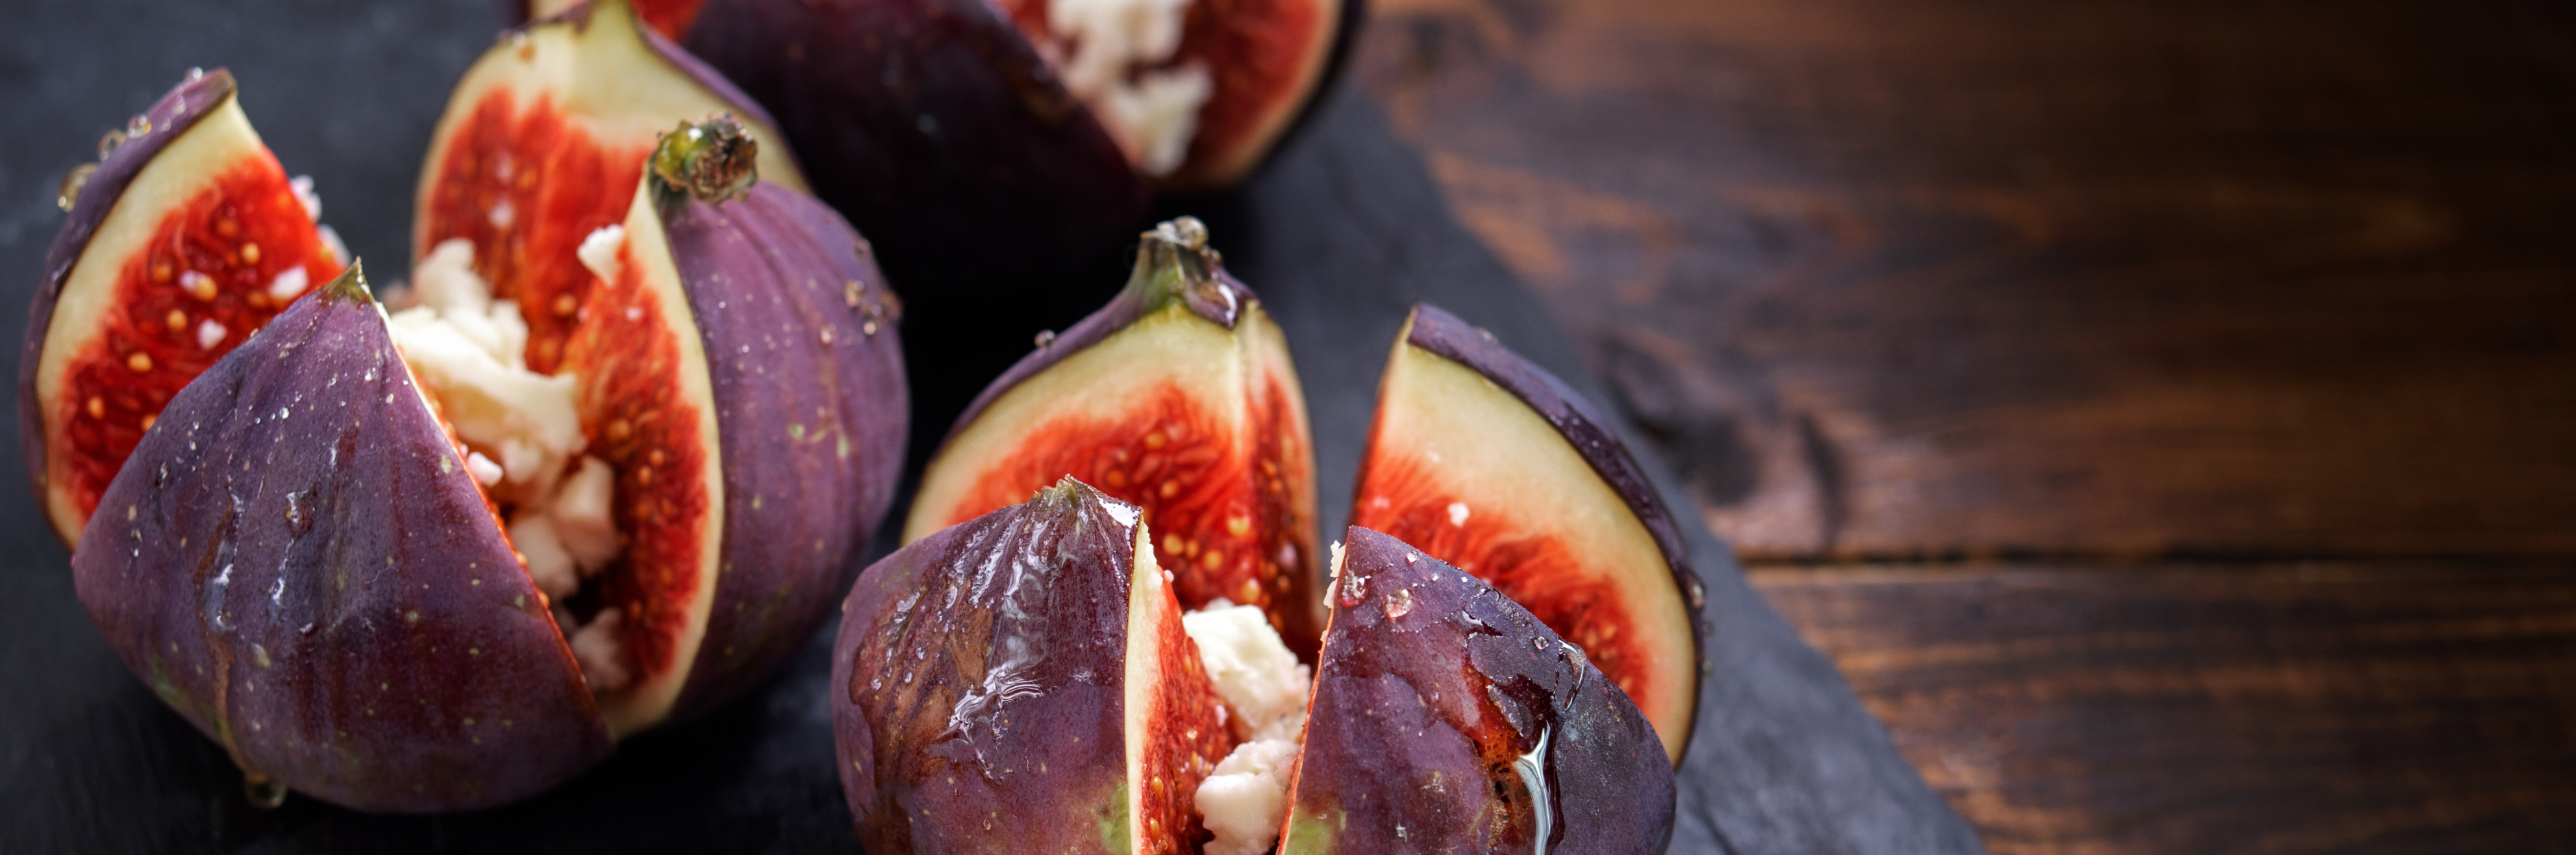 Figs With Yoghurt, Toasted Walnuts and Honey